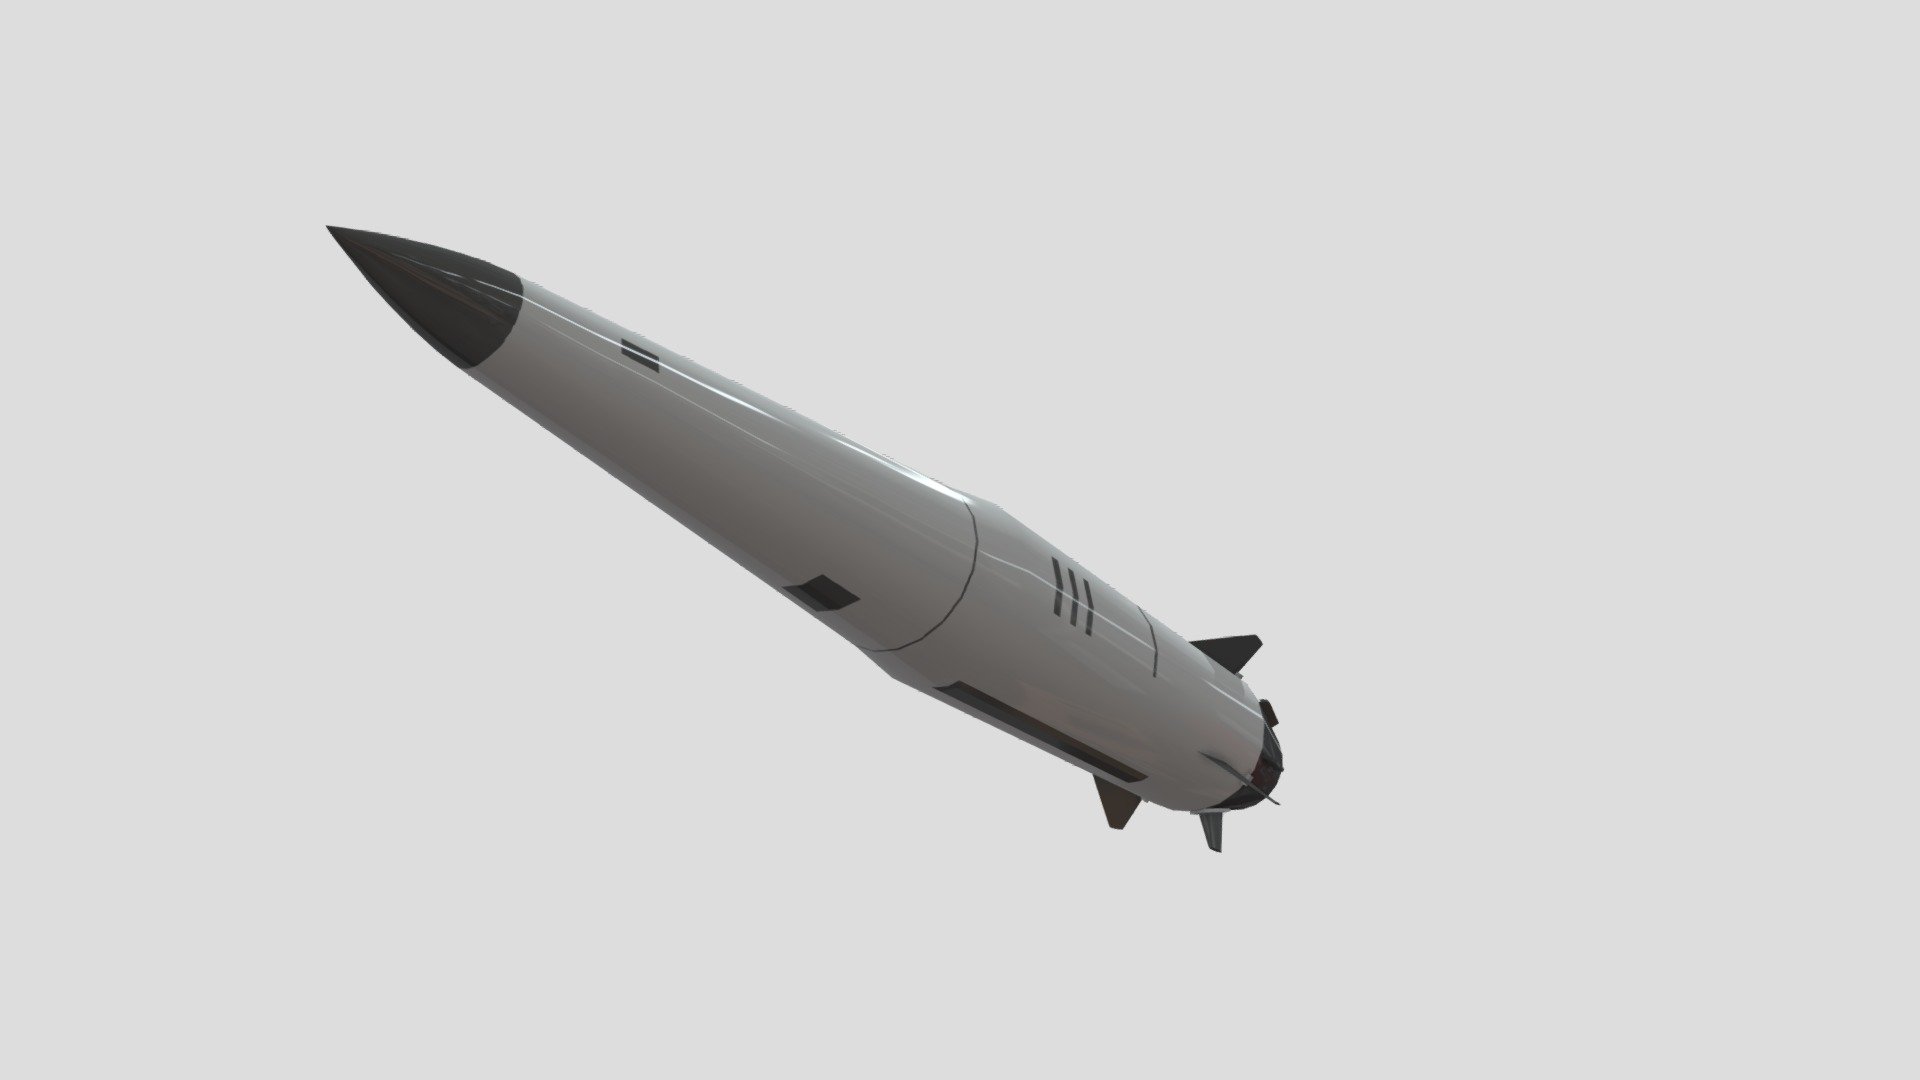 The Kh-47M2 Kinzhal is a Russian air-launched ballistic missile. It has a claimed range of more than 2,000 km, Mach 10 speed, and an ability to perform evasive maneuvers at every stage of its flight 3d model